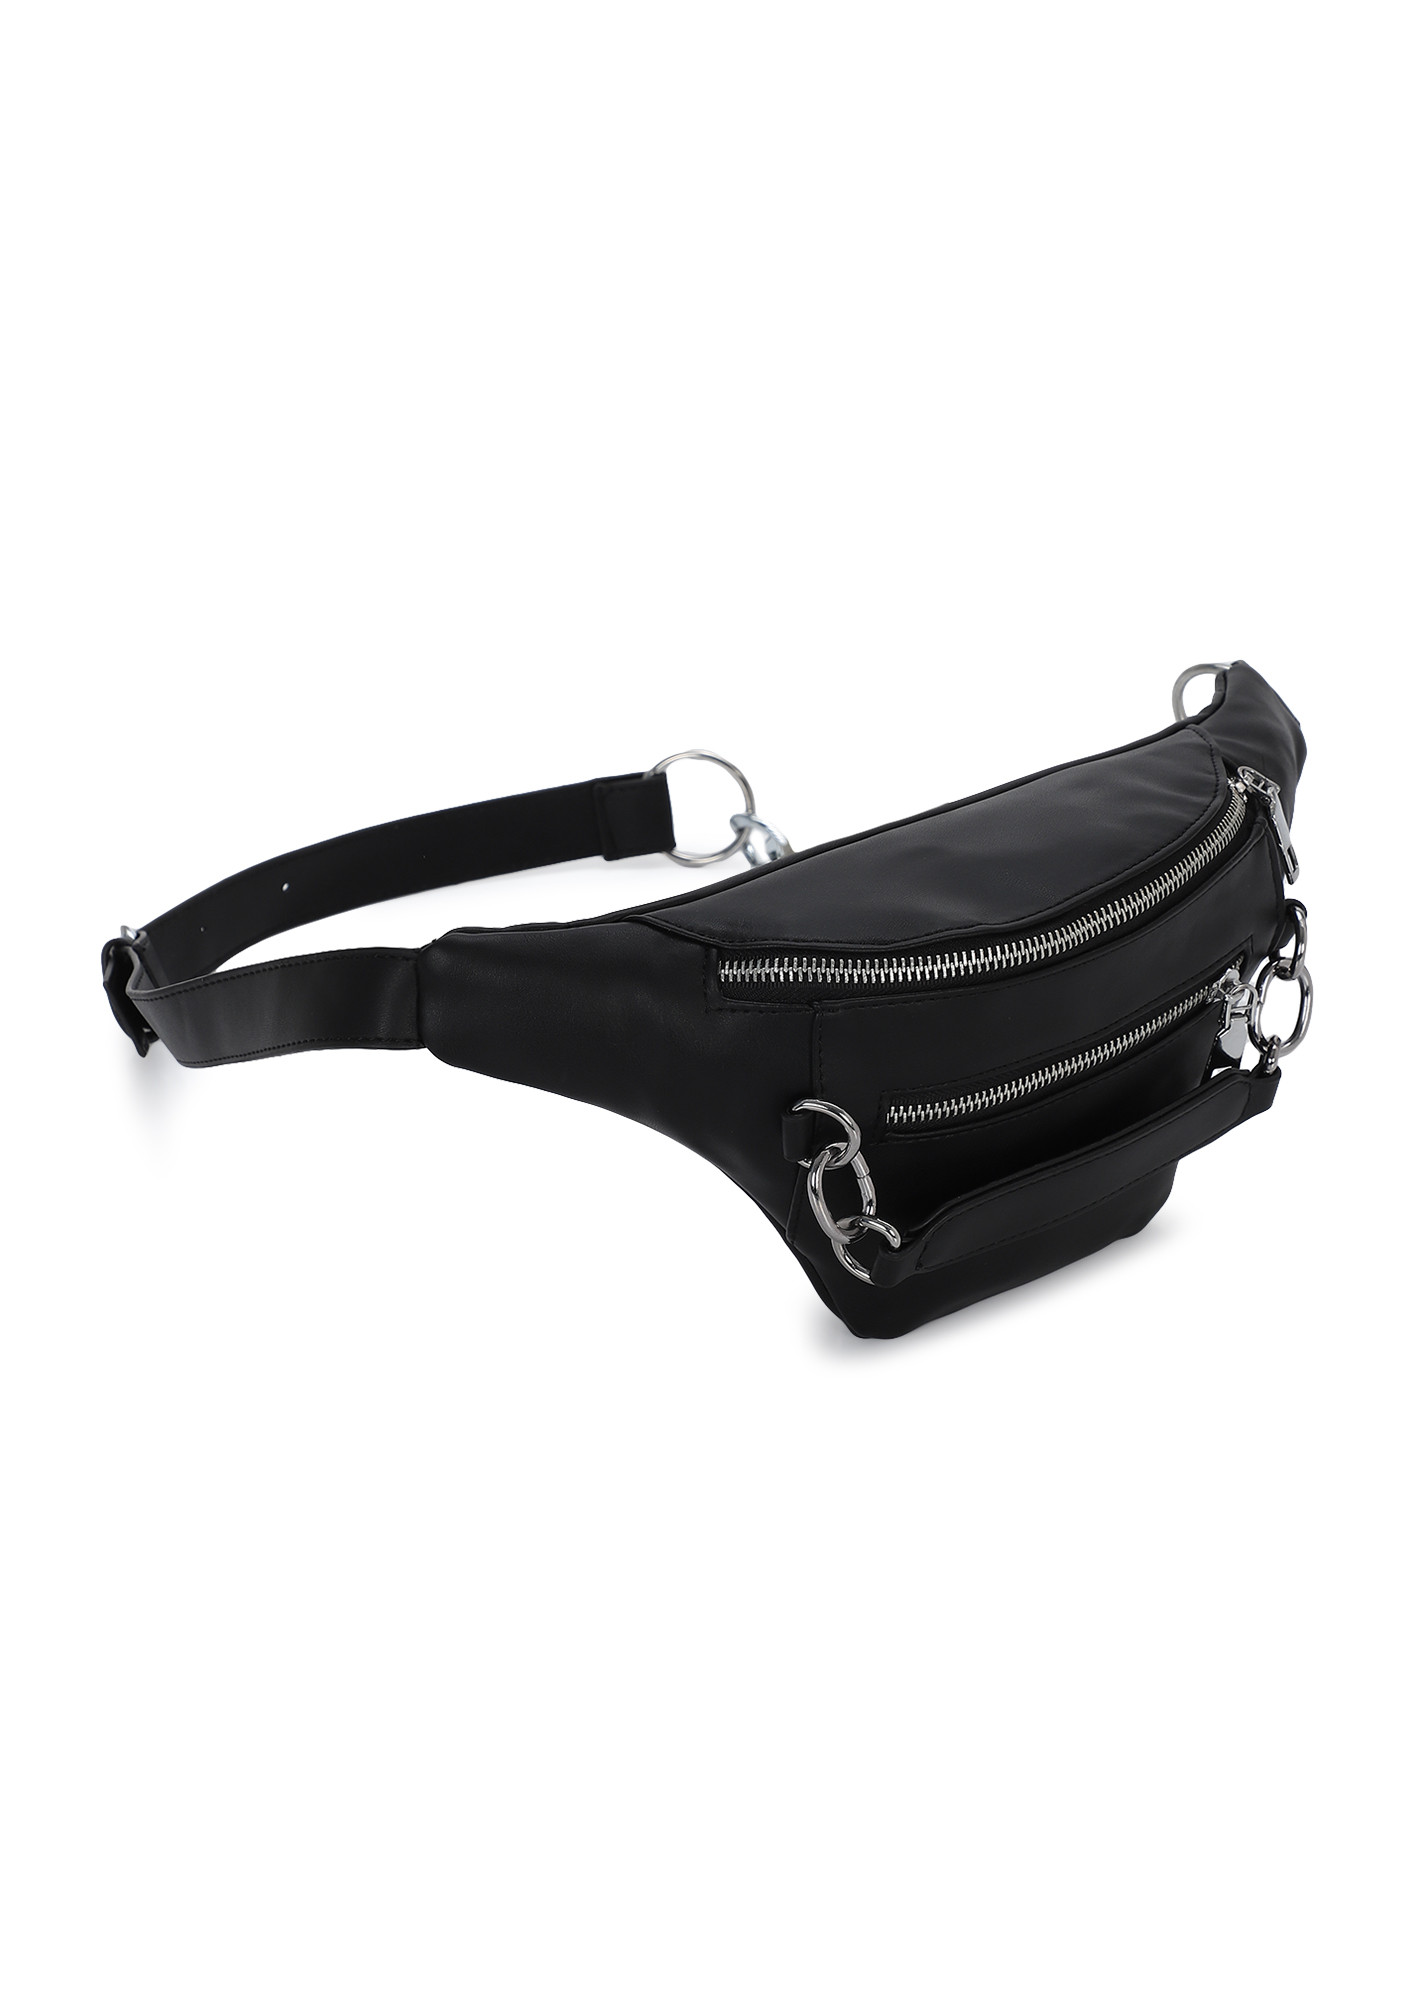 QUEEN OF HEARTS BLACK FANNY PACK